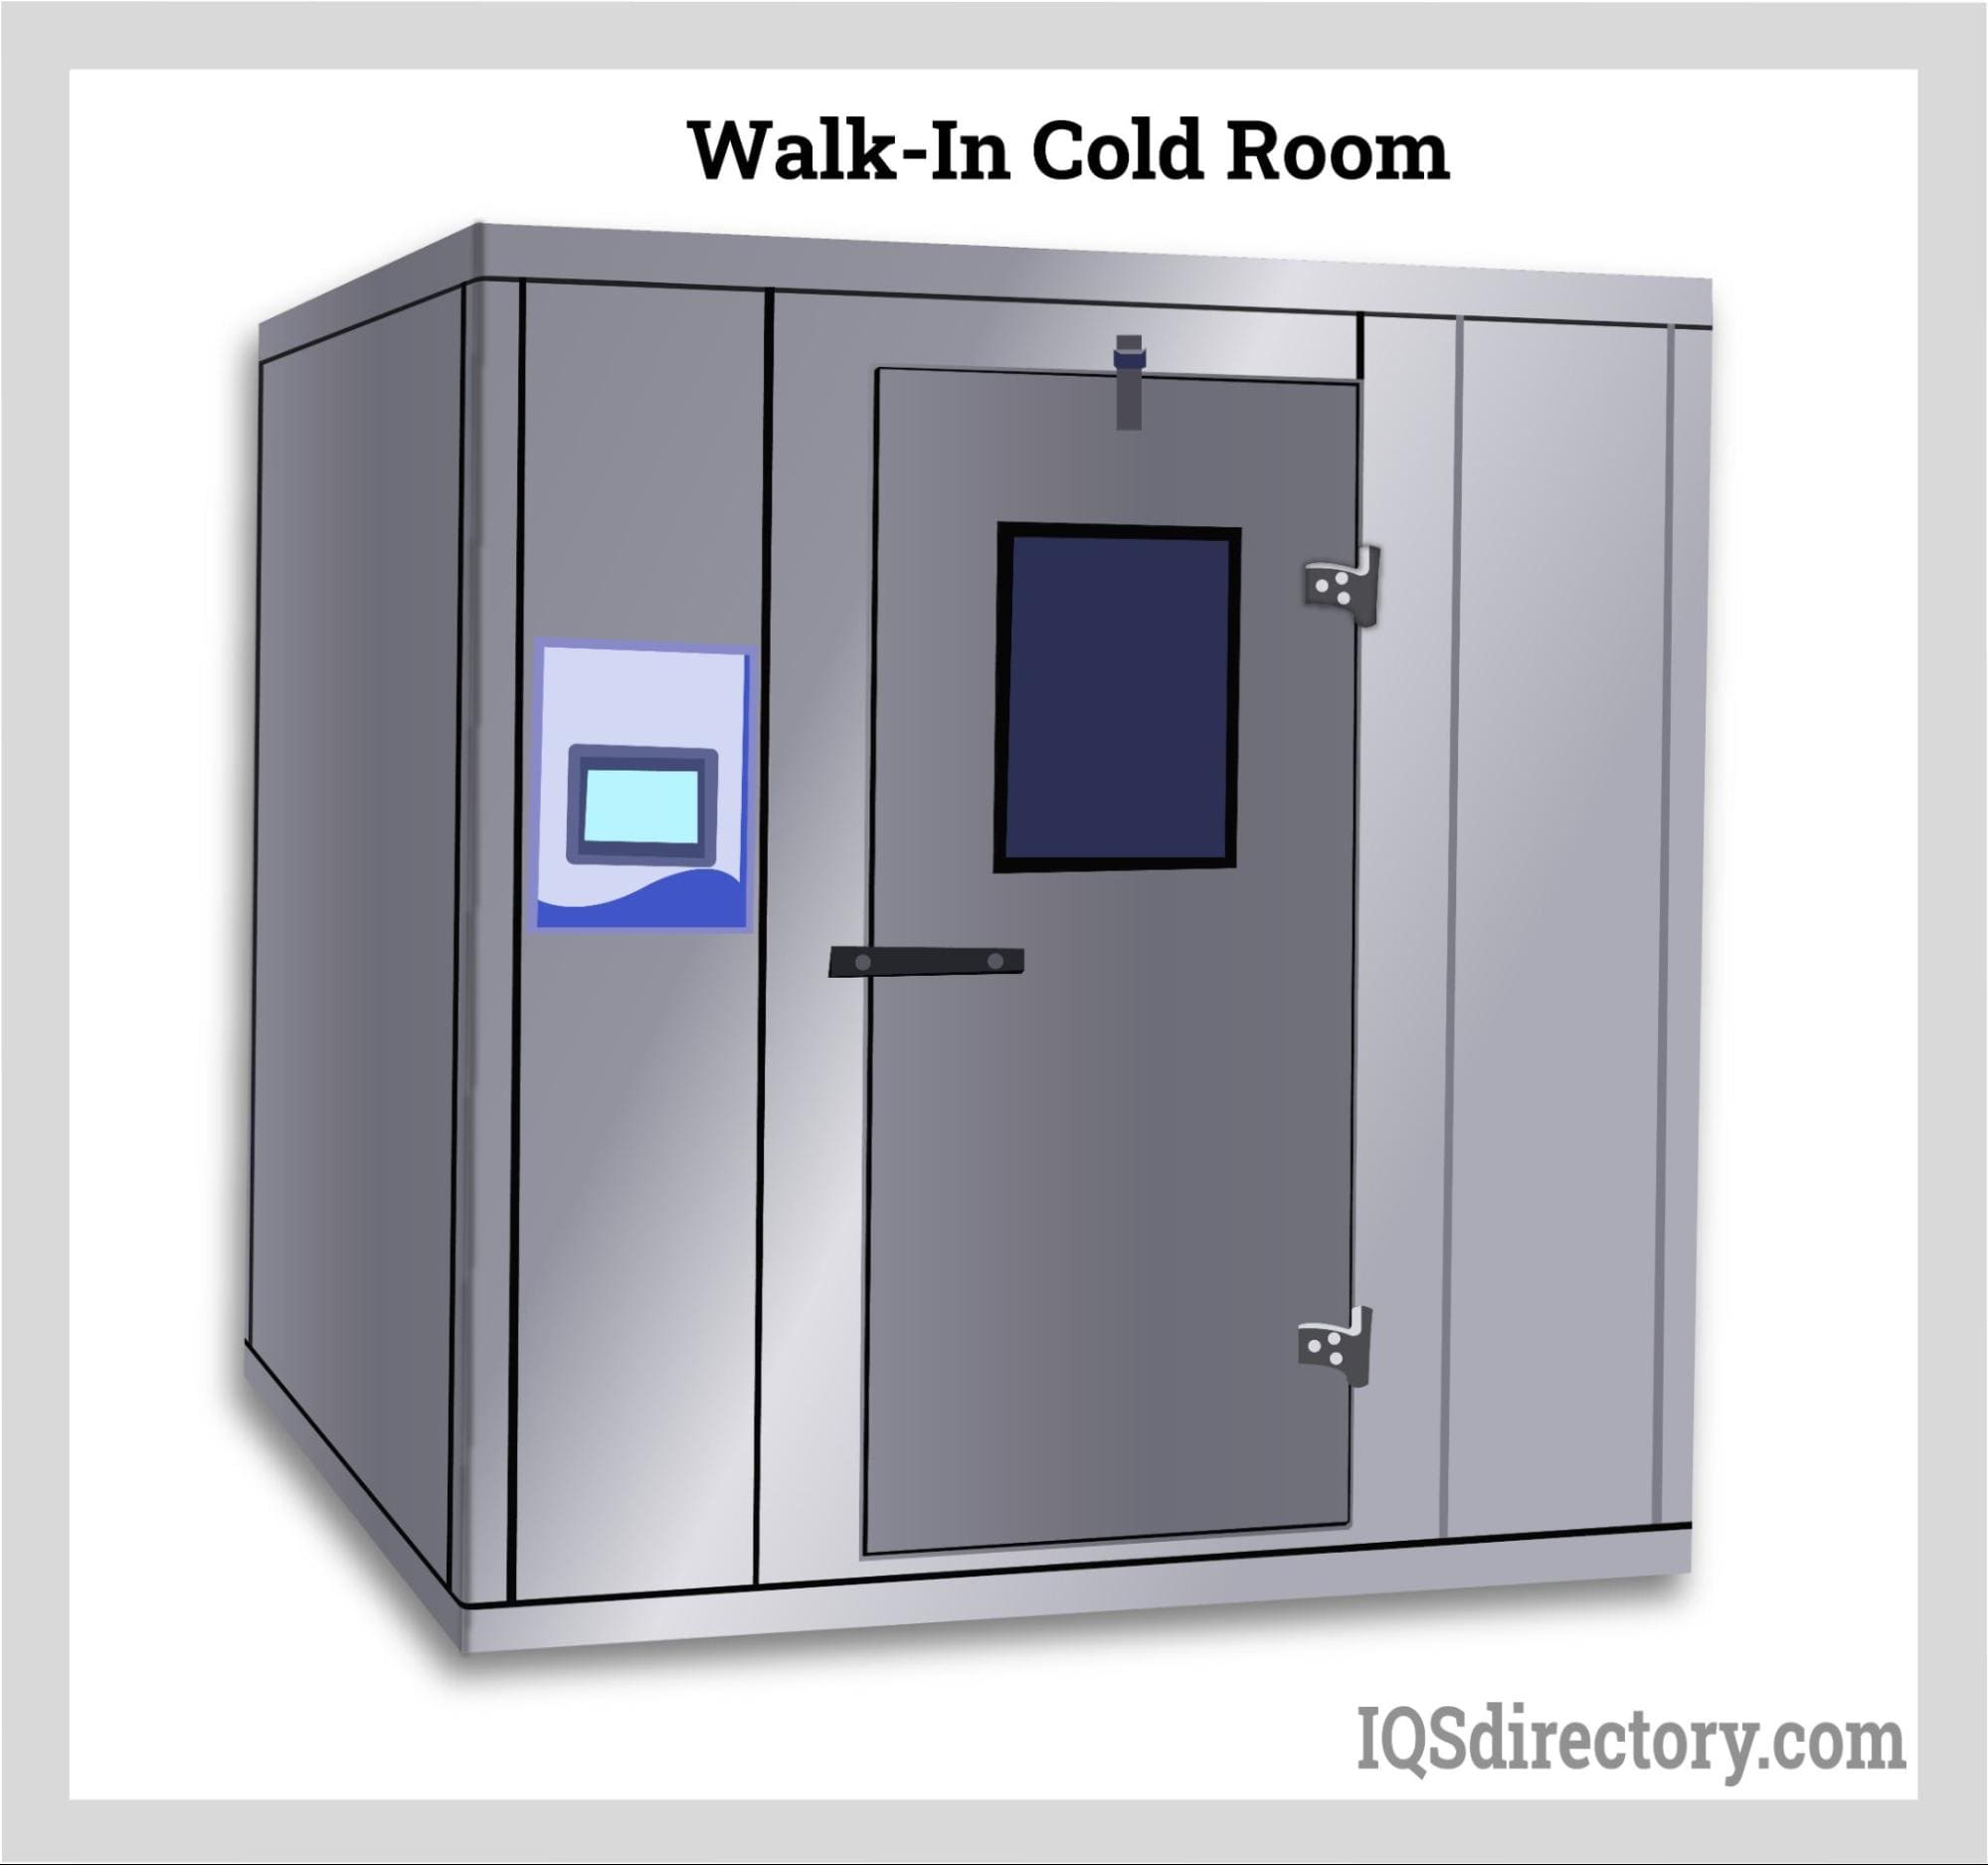 Walk-In Cold Room